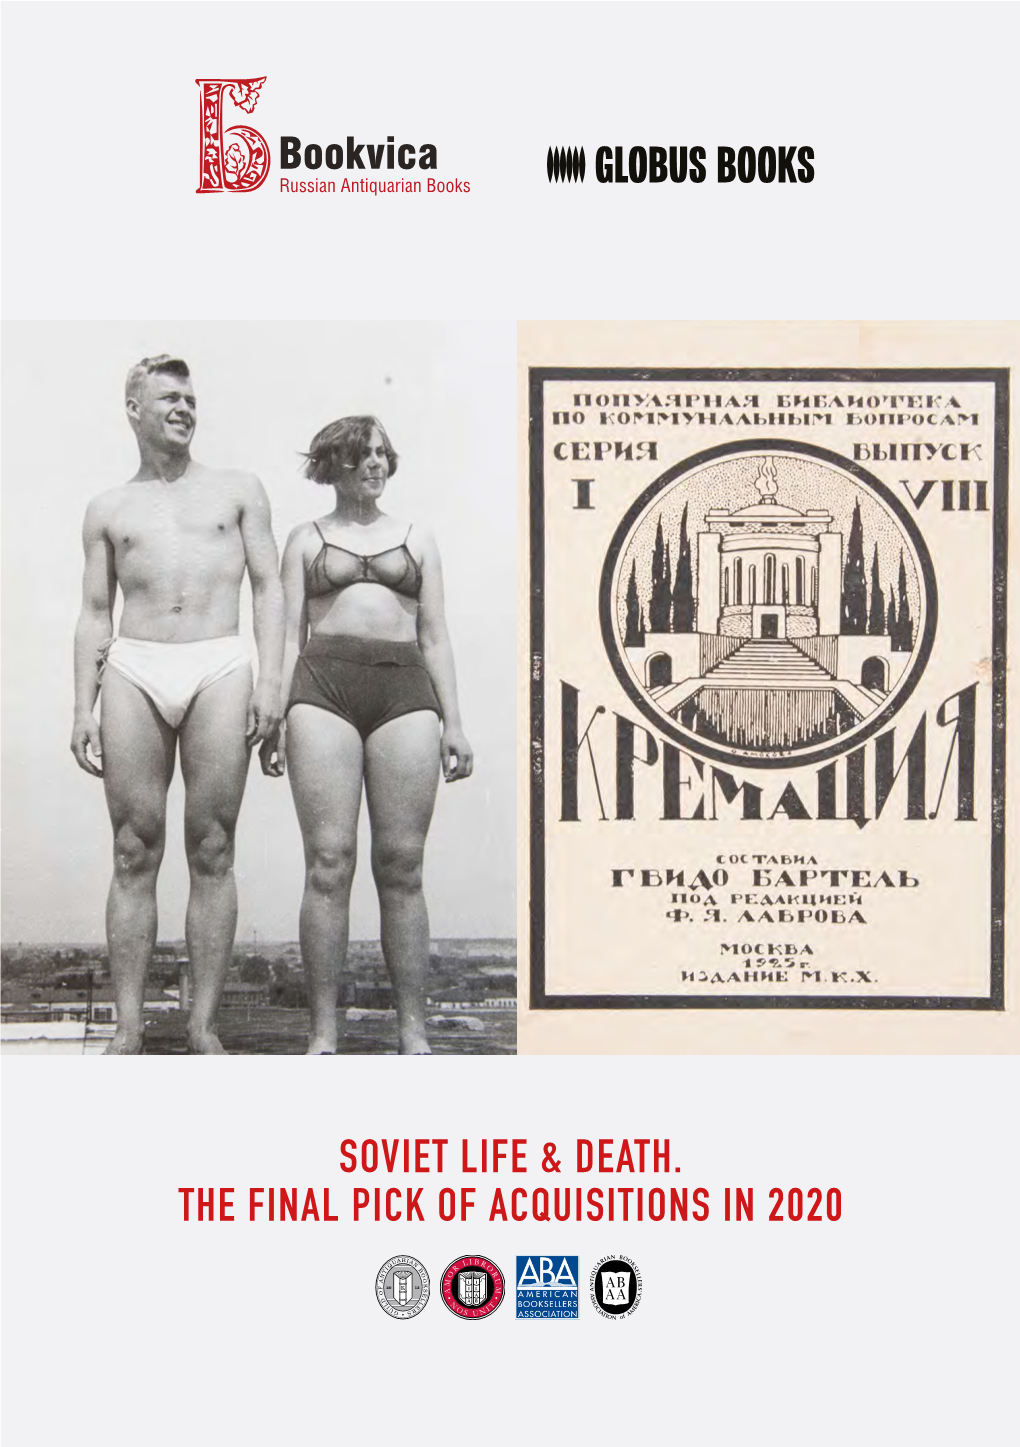 Soviet Life & Death. the Final Pick of Acquisitions in 2020